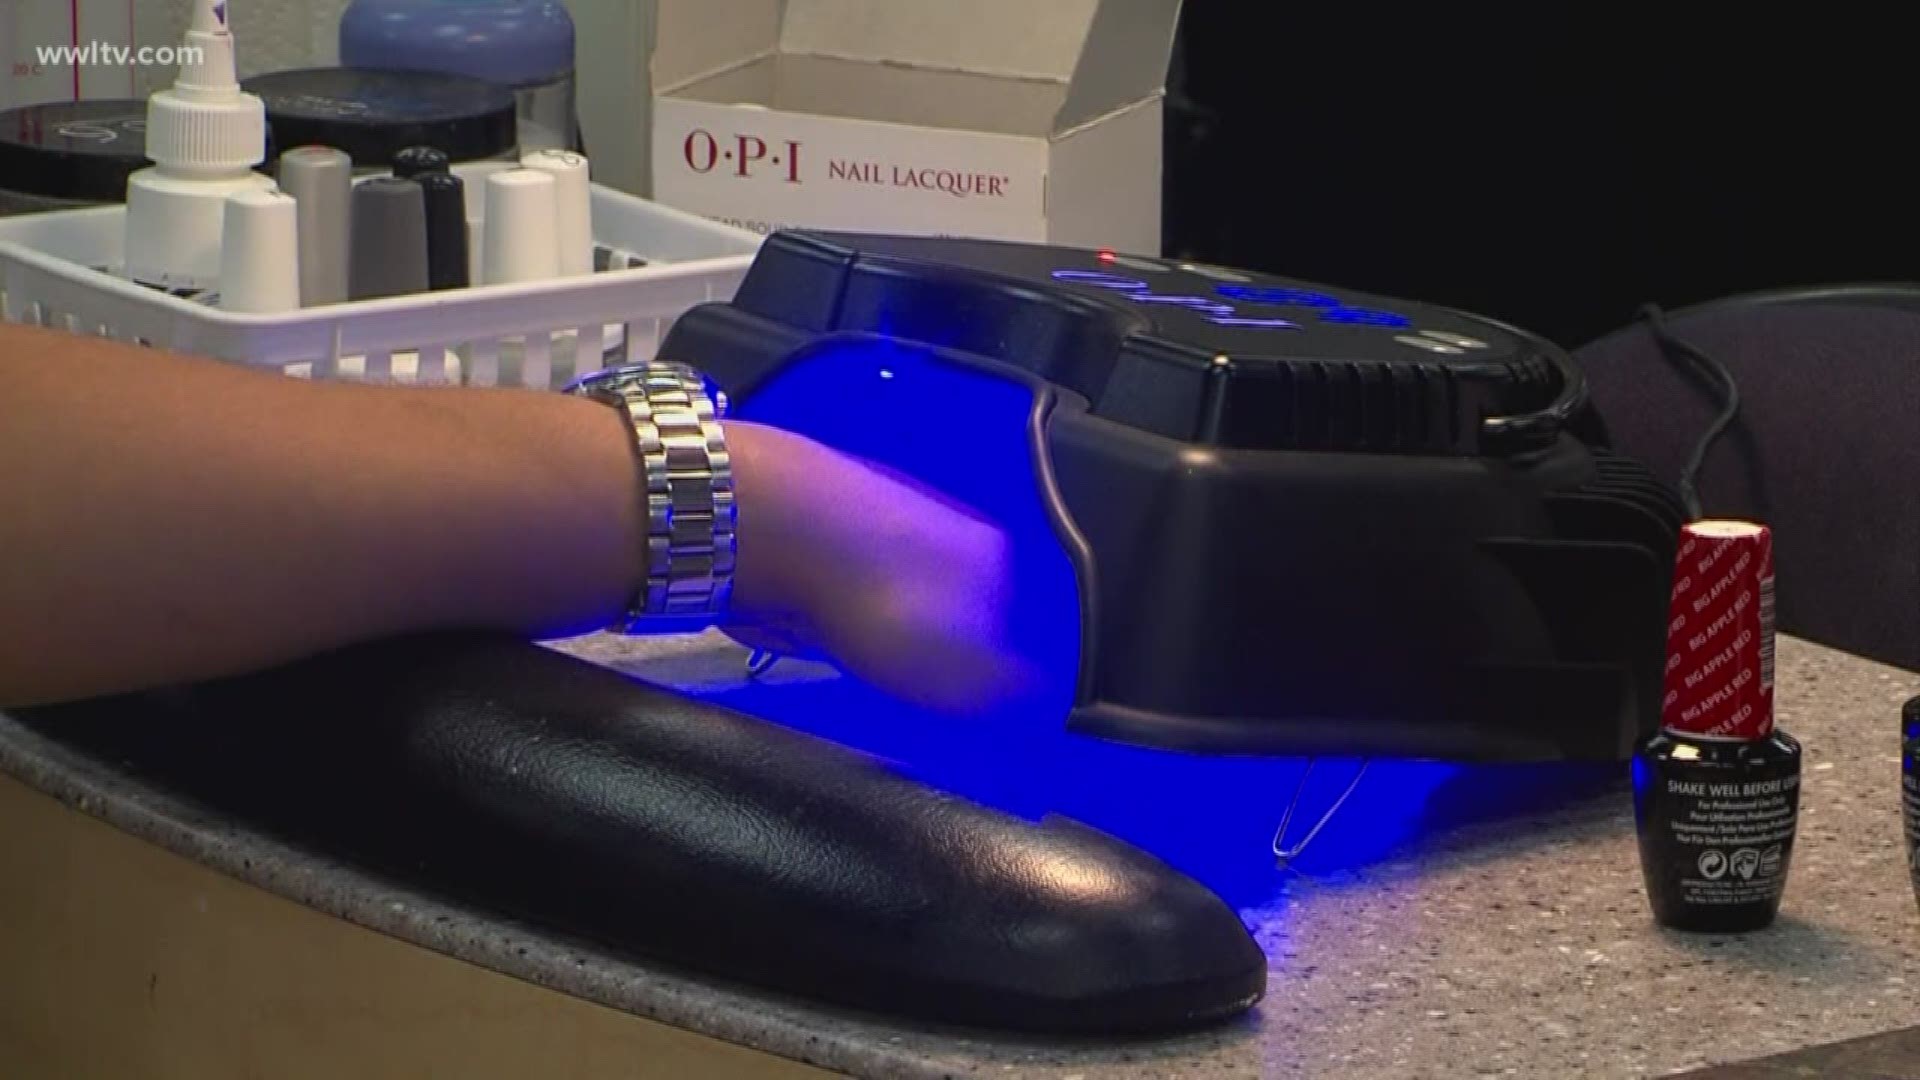 Wrinkle Free Friday: Can UV light to dry nails cause skin cancer? |  